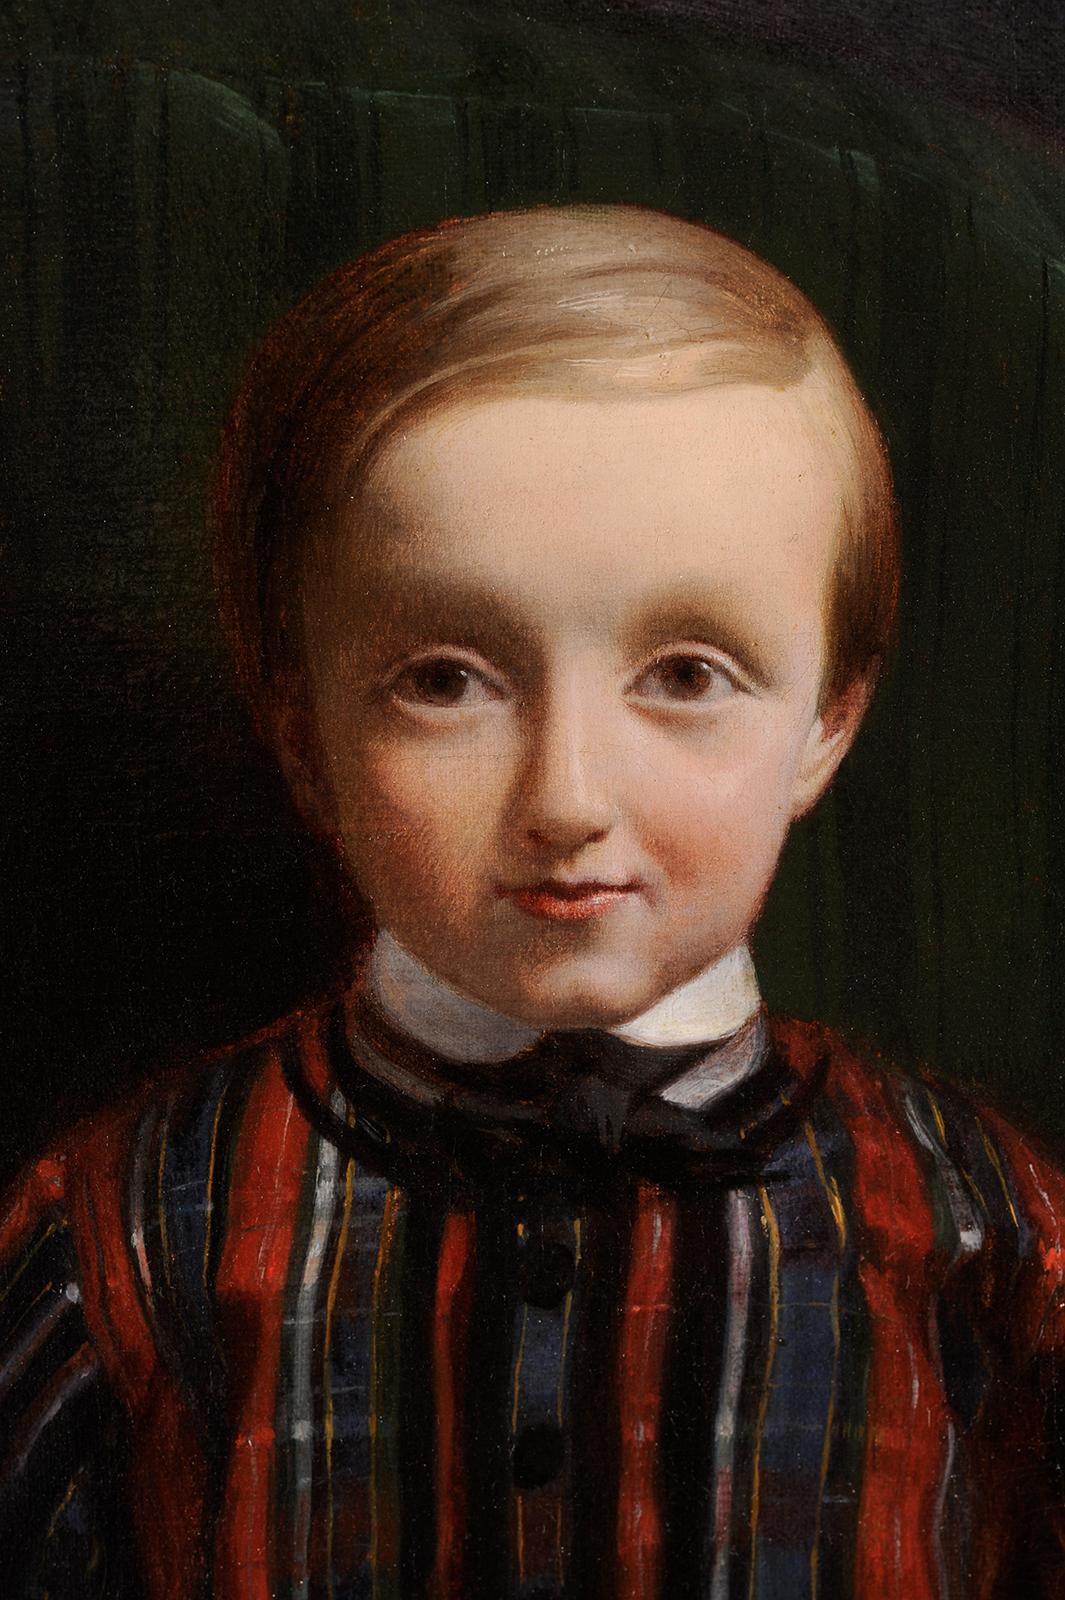 Charles FRÉCHOU
(Paris 1820 – Paris 1900)
Portrait of a child with a cat
Oil on canvas
H. 41 cm; L. 33 cm
Signed lower left and dated 1849

Apart from participation in the Salon between 1841 and 1888, very few elements of his life have come down to